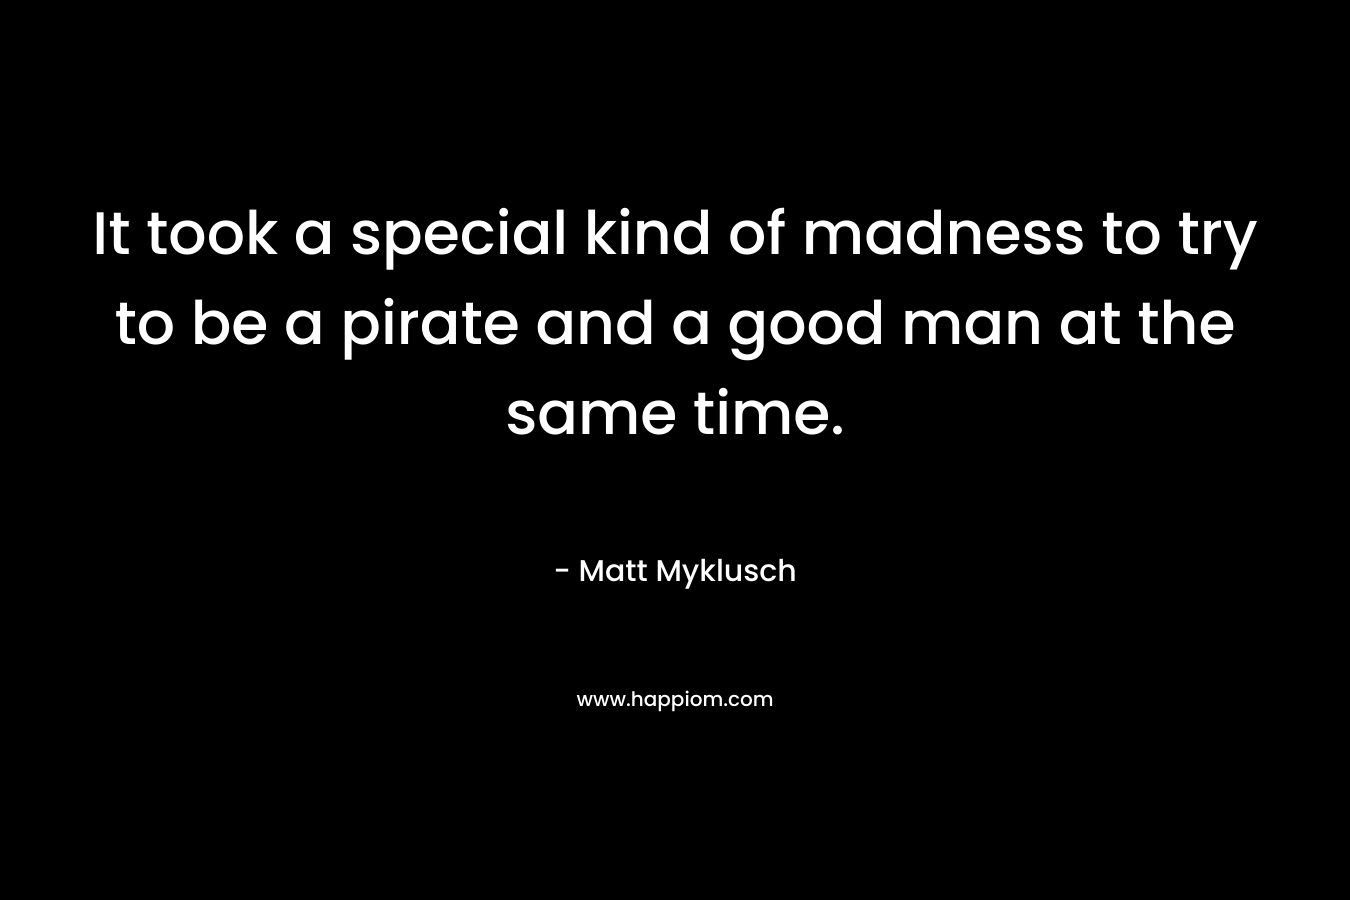 It took a special kind of madness to try to be a pirate and a good man at the same time.